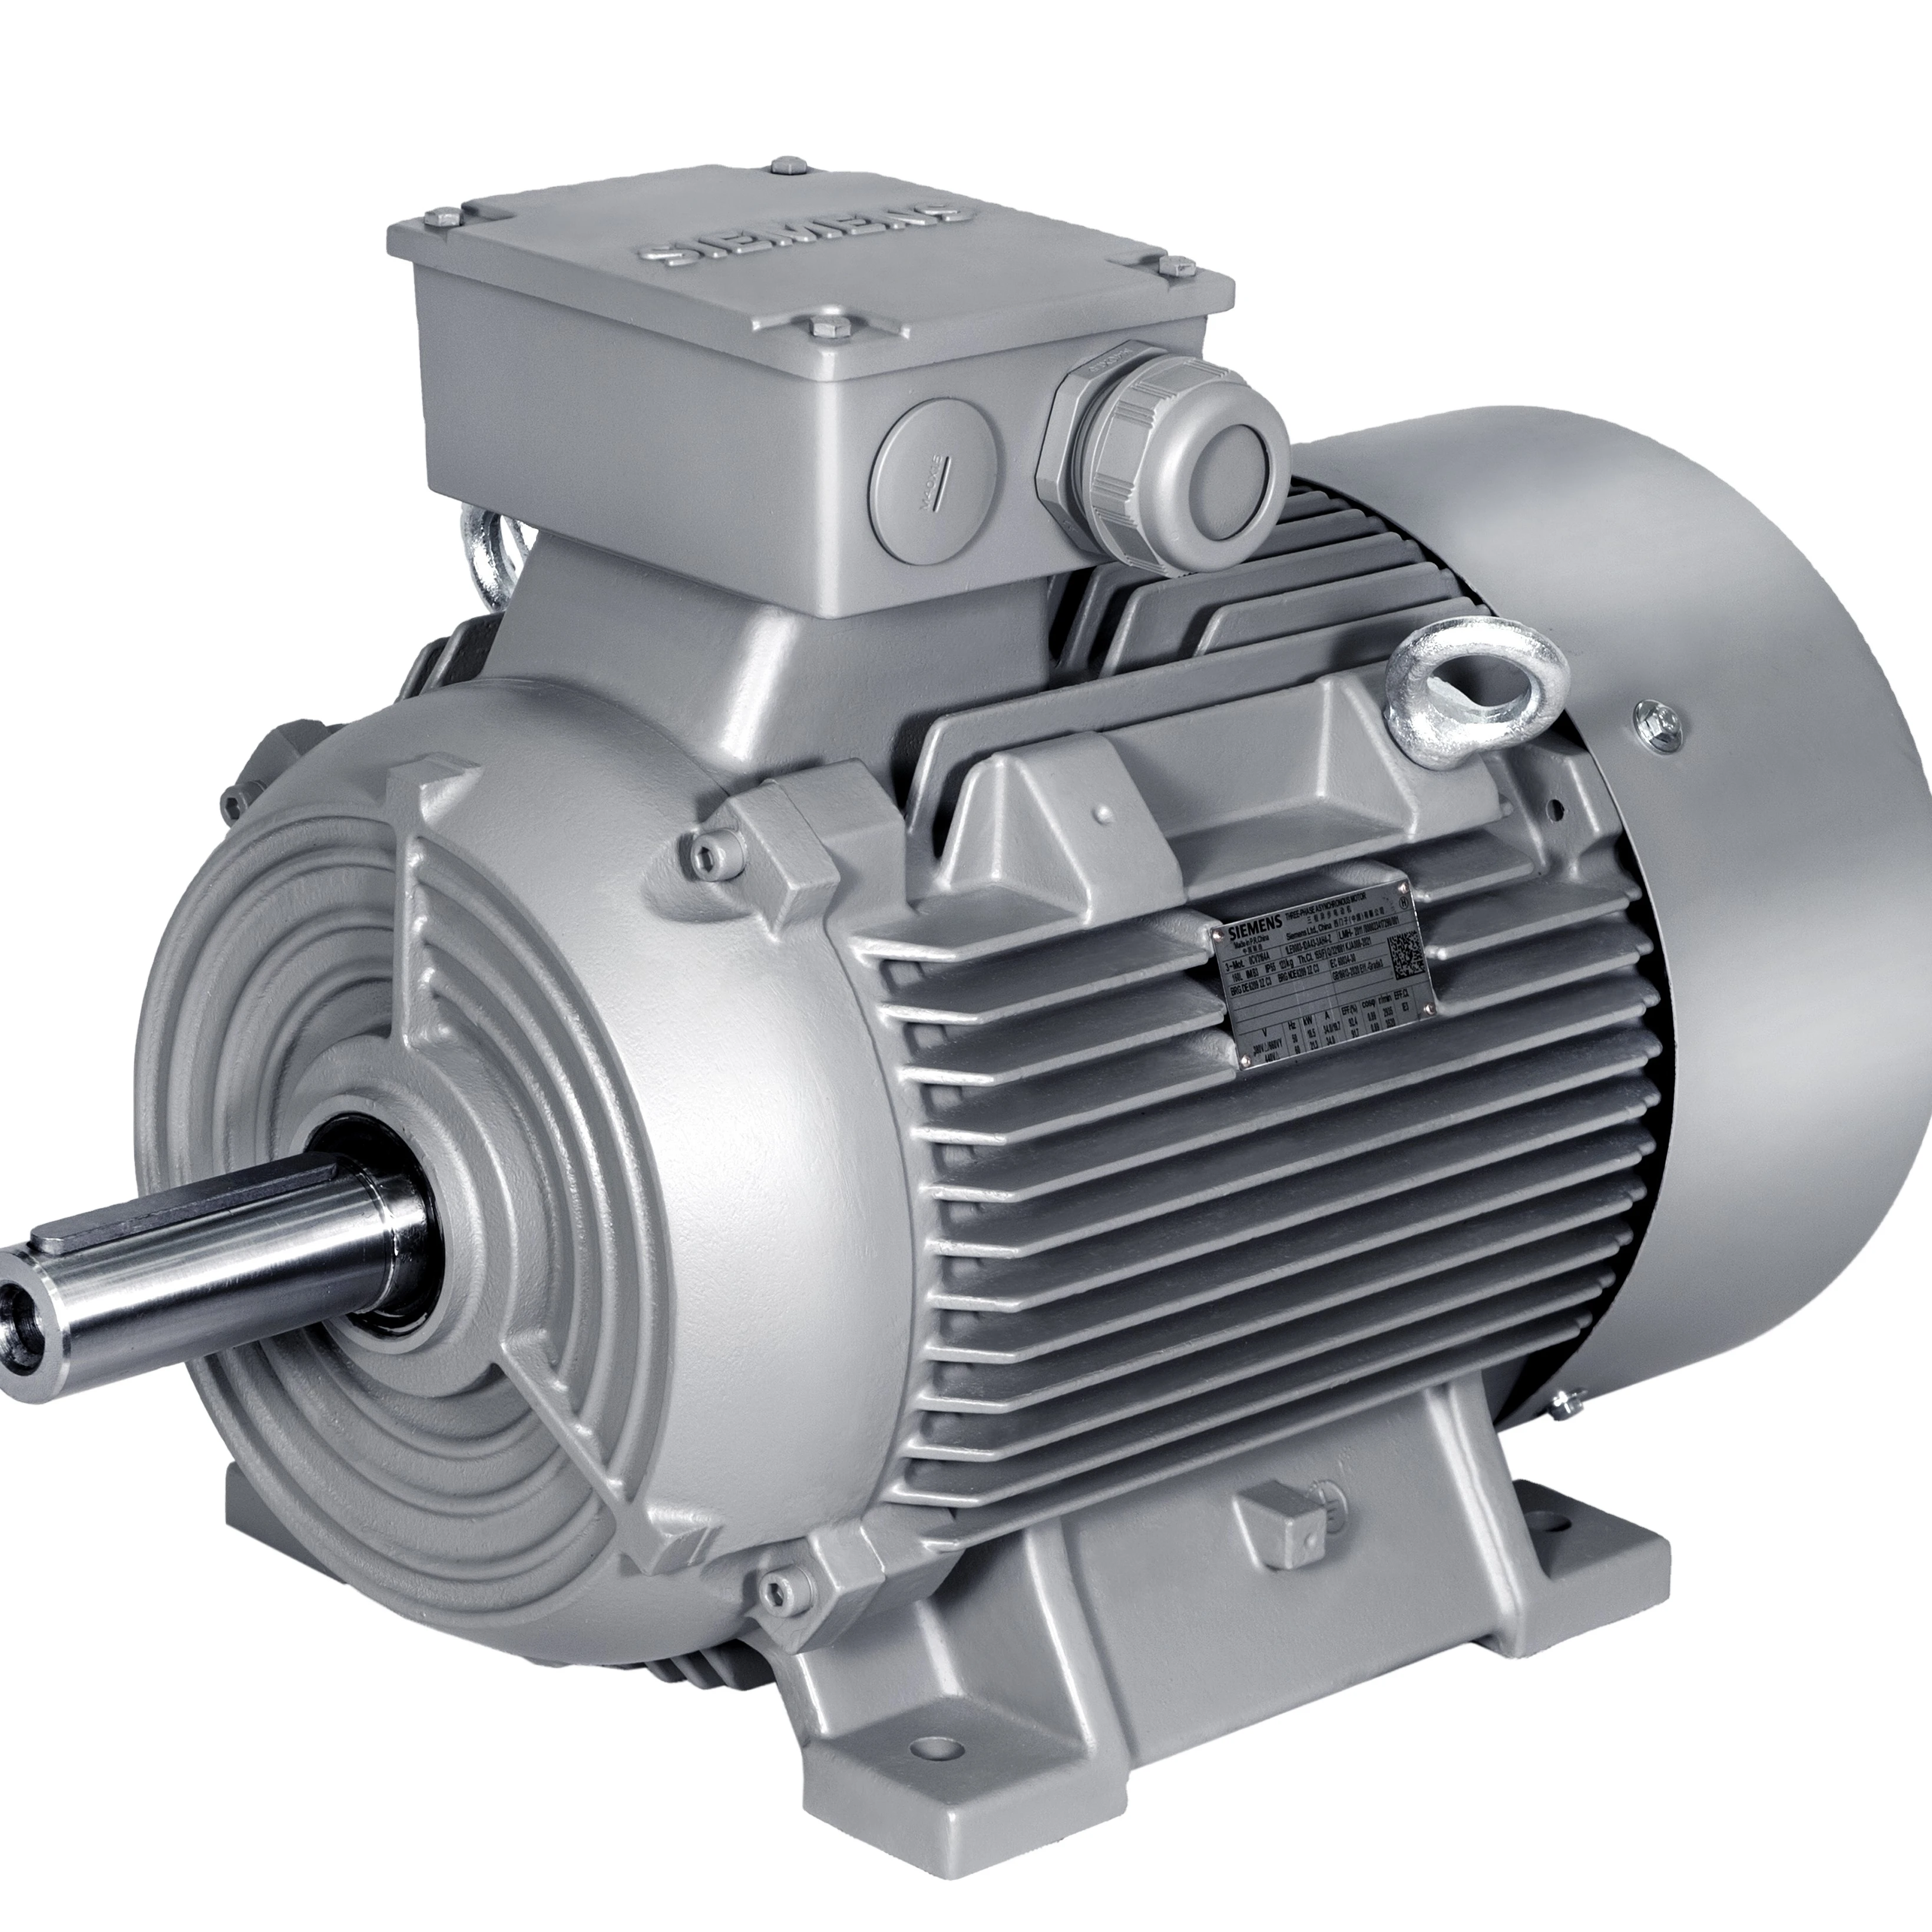 Siemens electric motor 230/380 AC Voltage and CE Certification